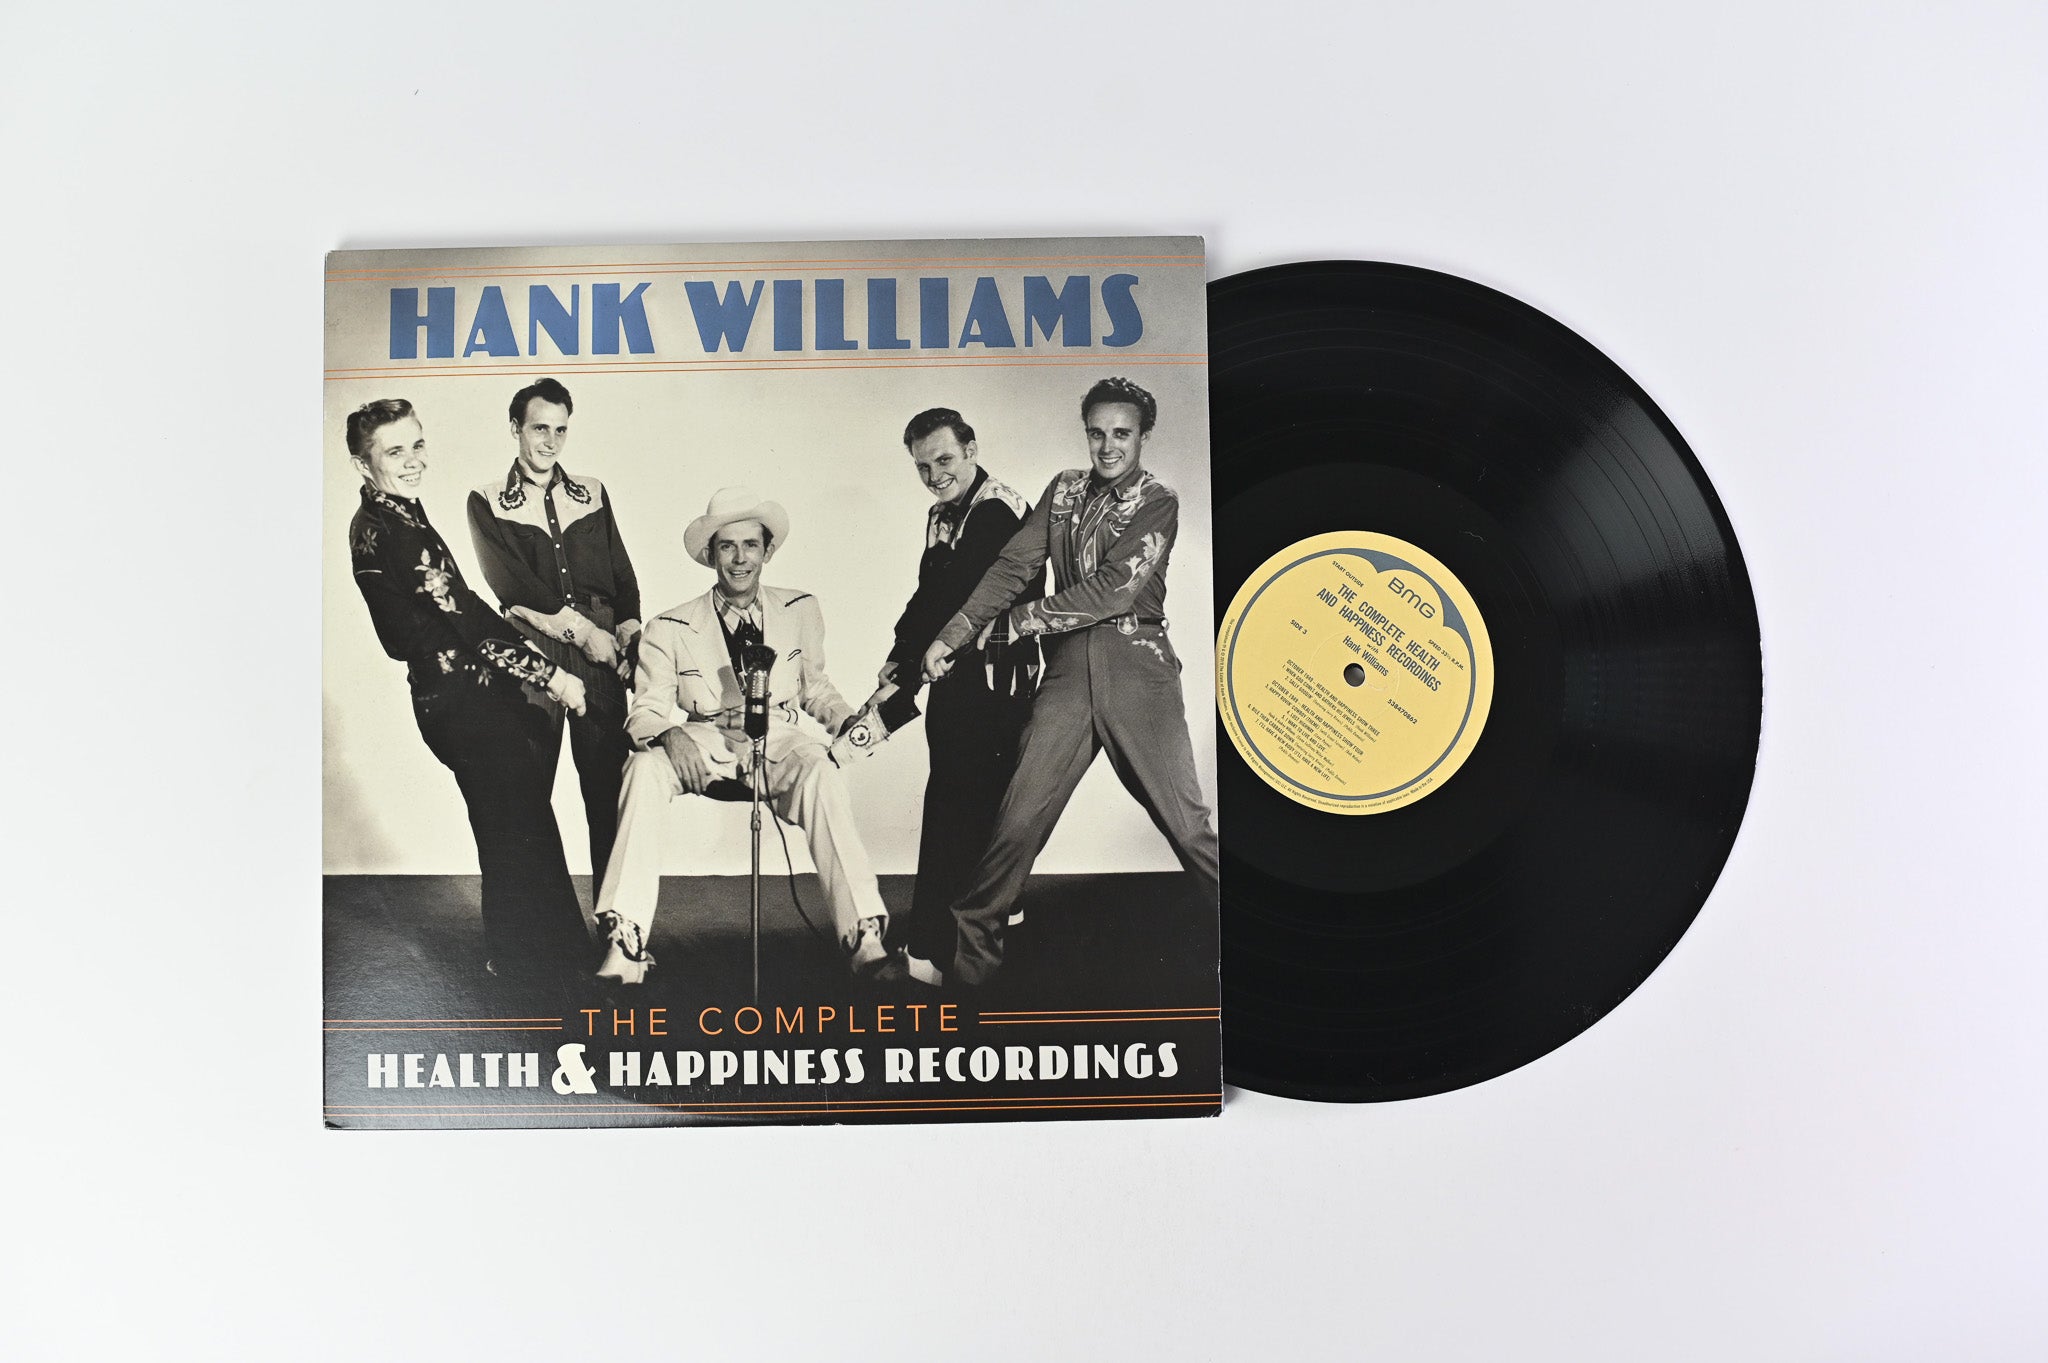 Hank Williams - The Complete Health & Happiness Recordings on BMG